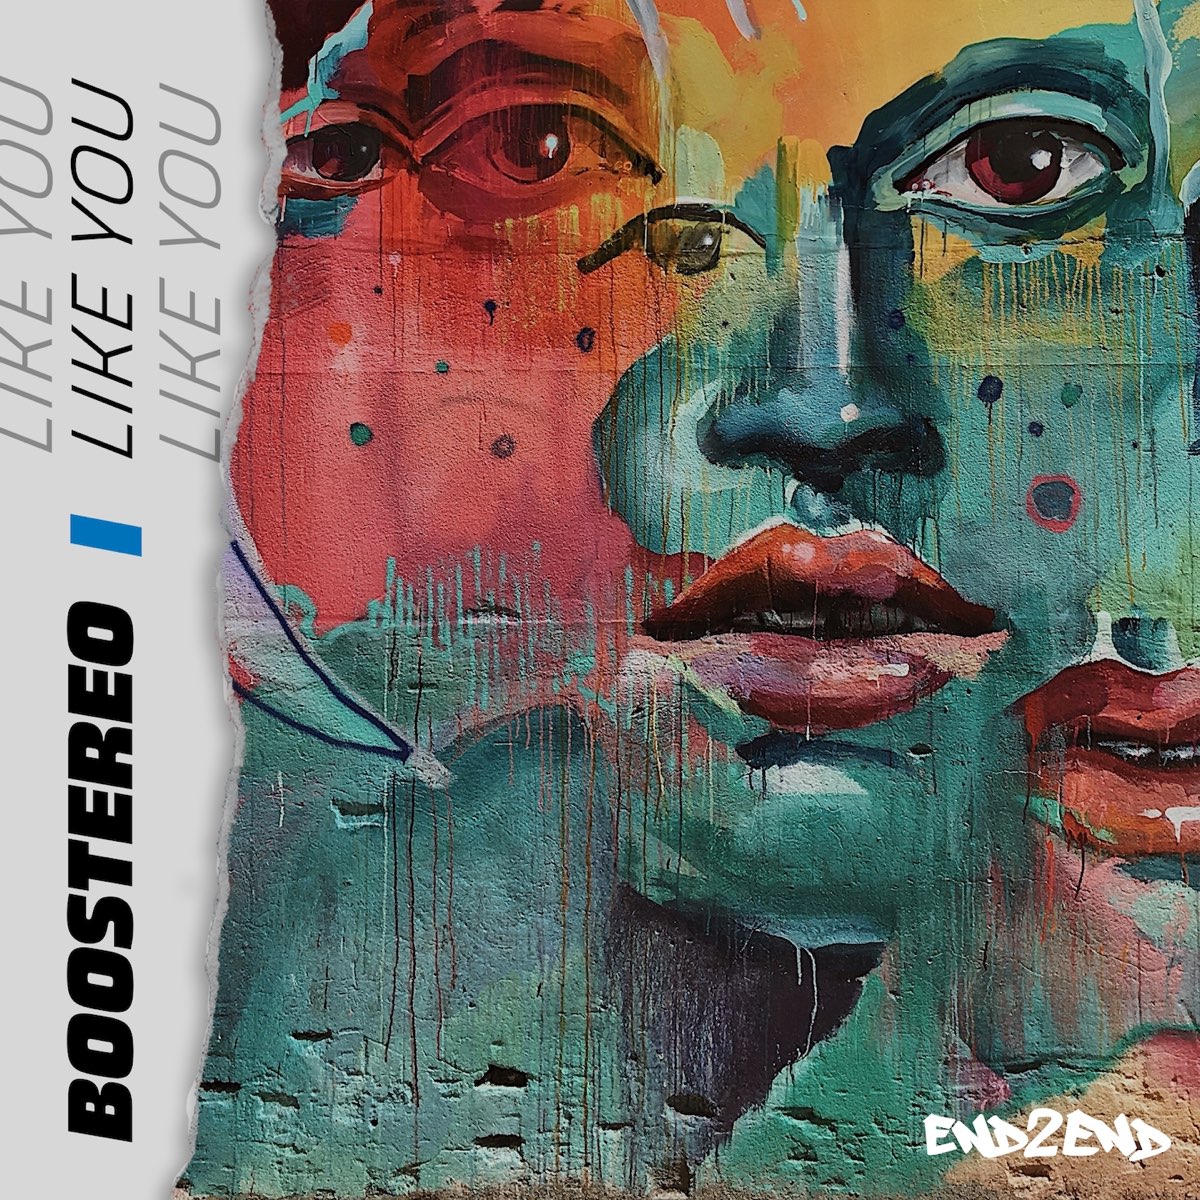 Boostereo Like You cover artwork